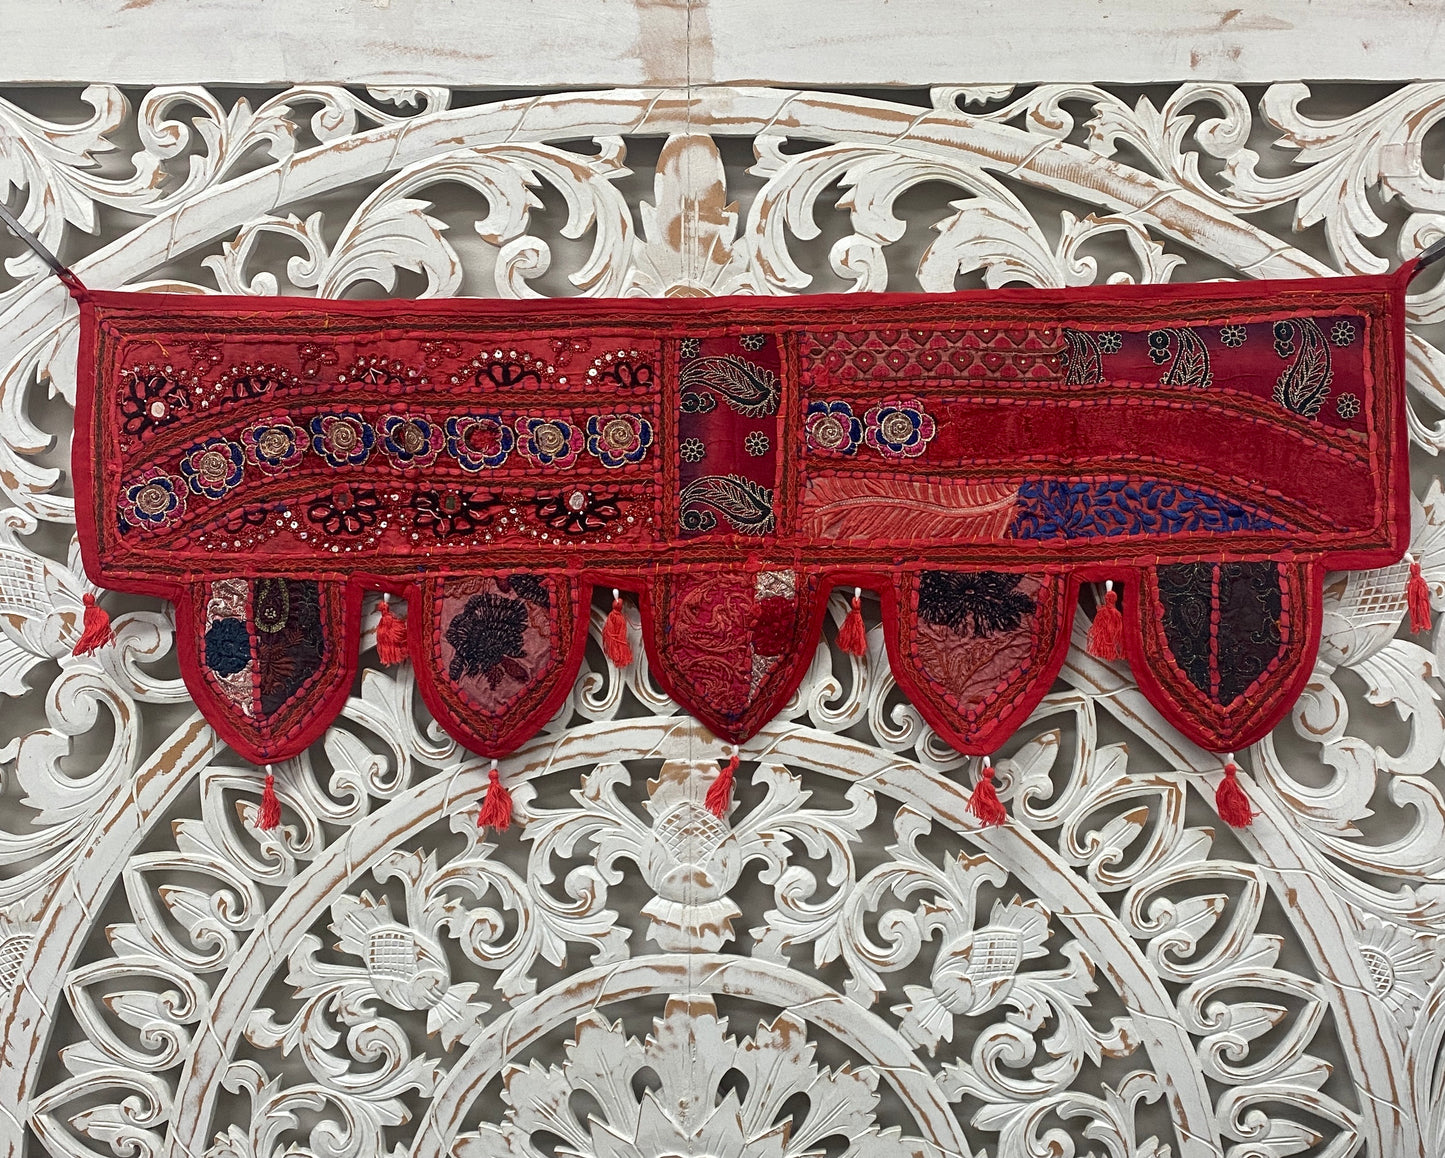 Rajasthani Embroidered Toran Window / Doorway decor - Available in 5 Colors